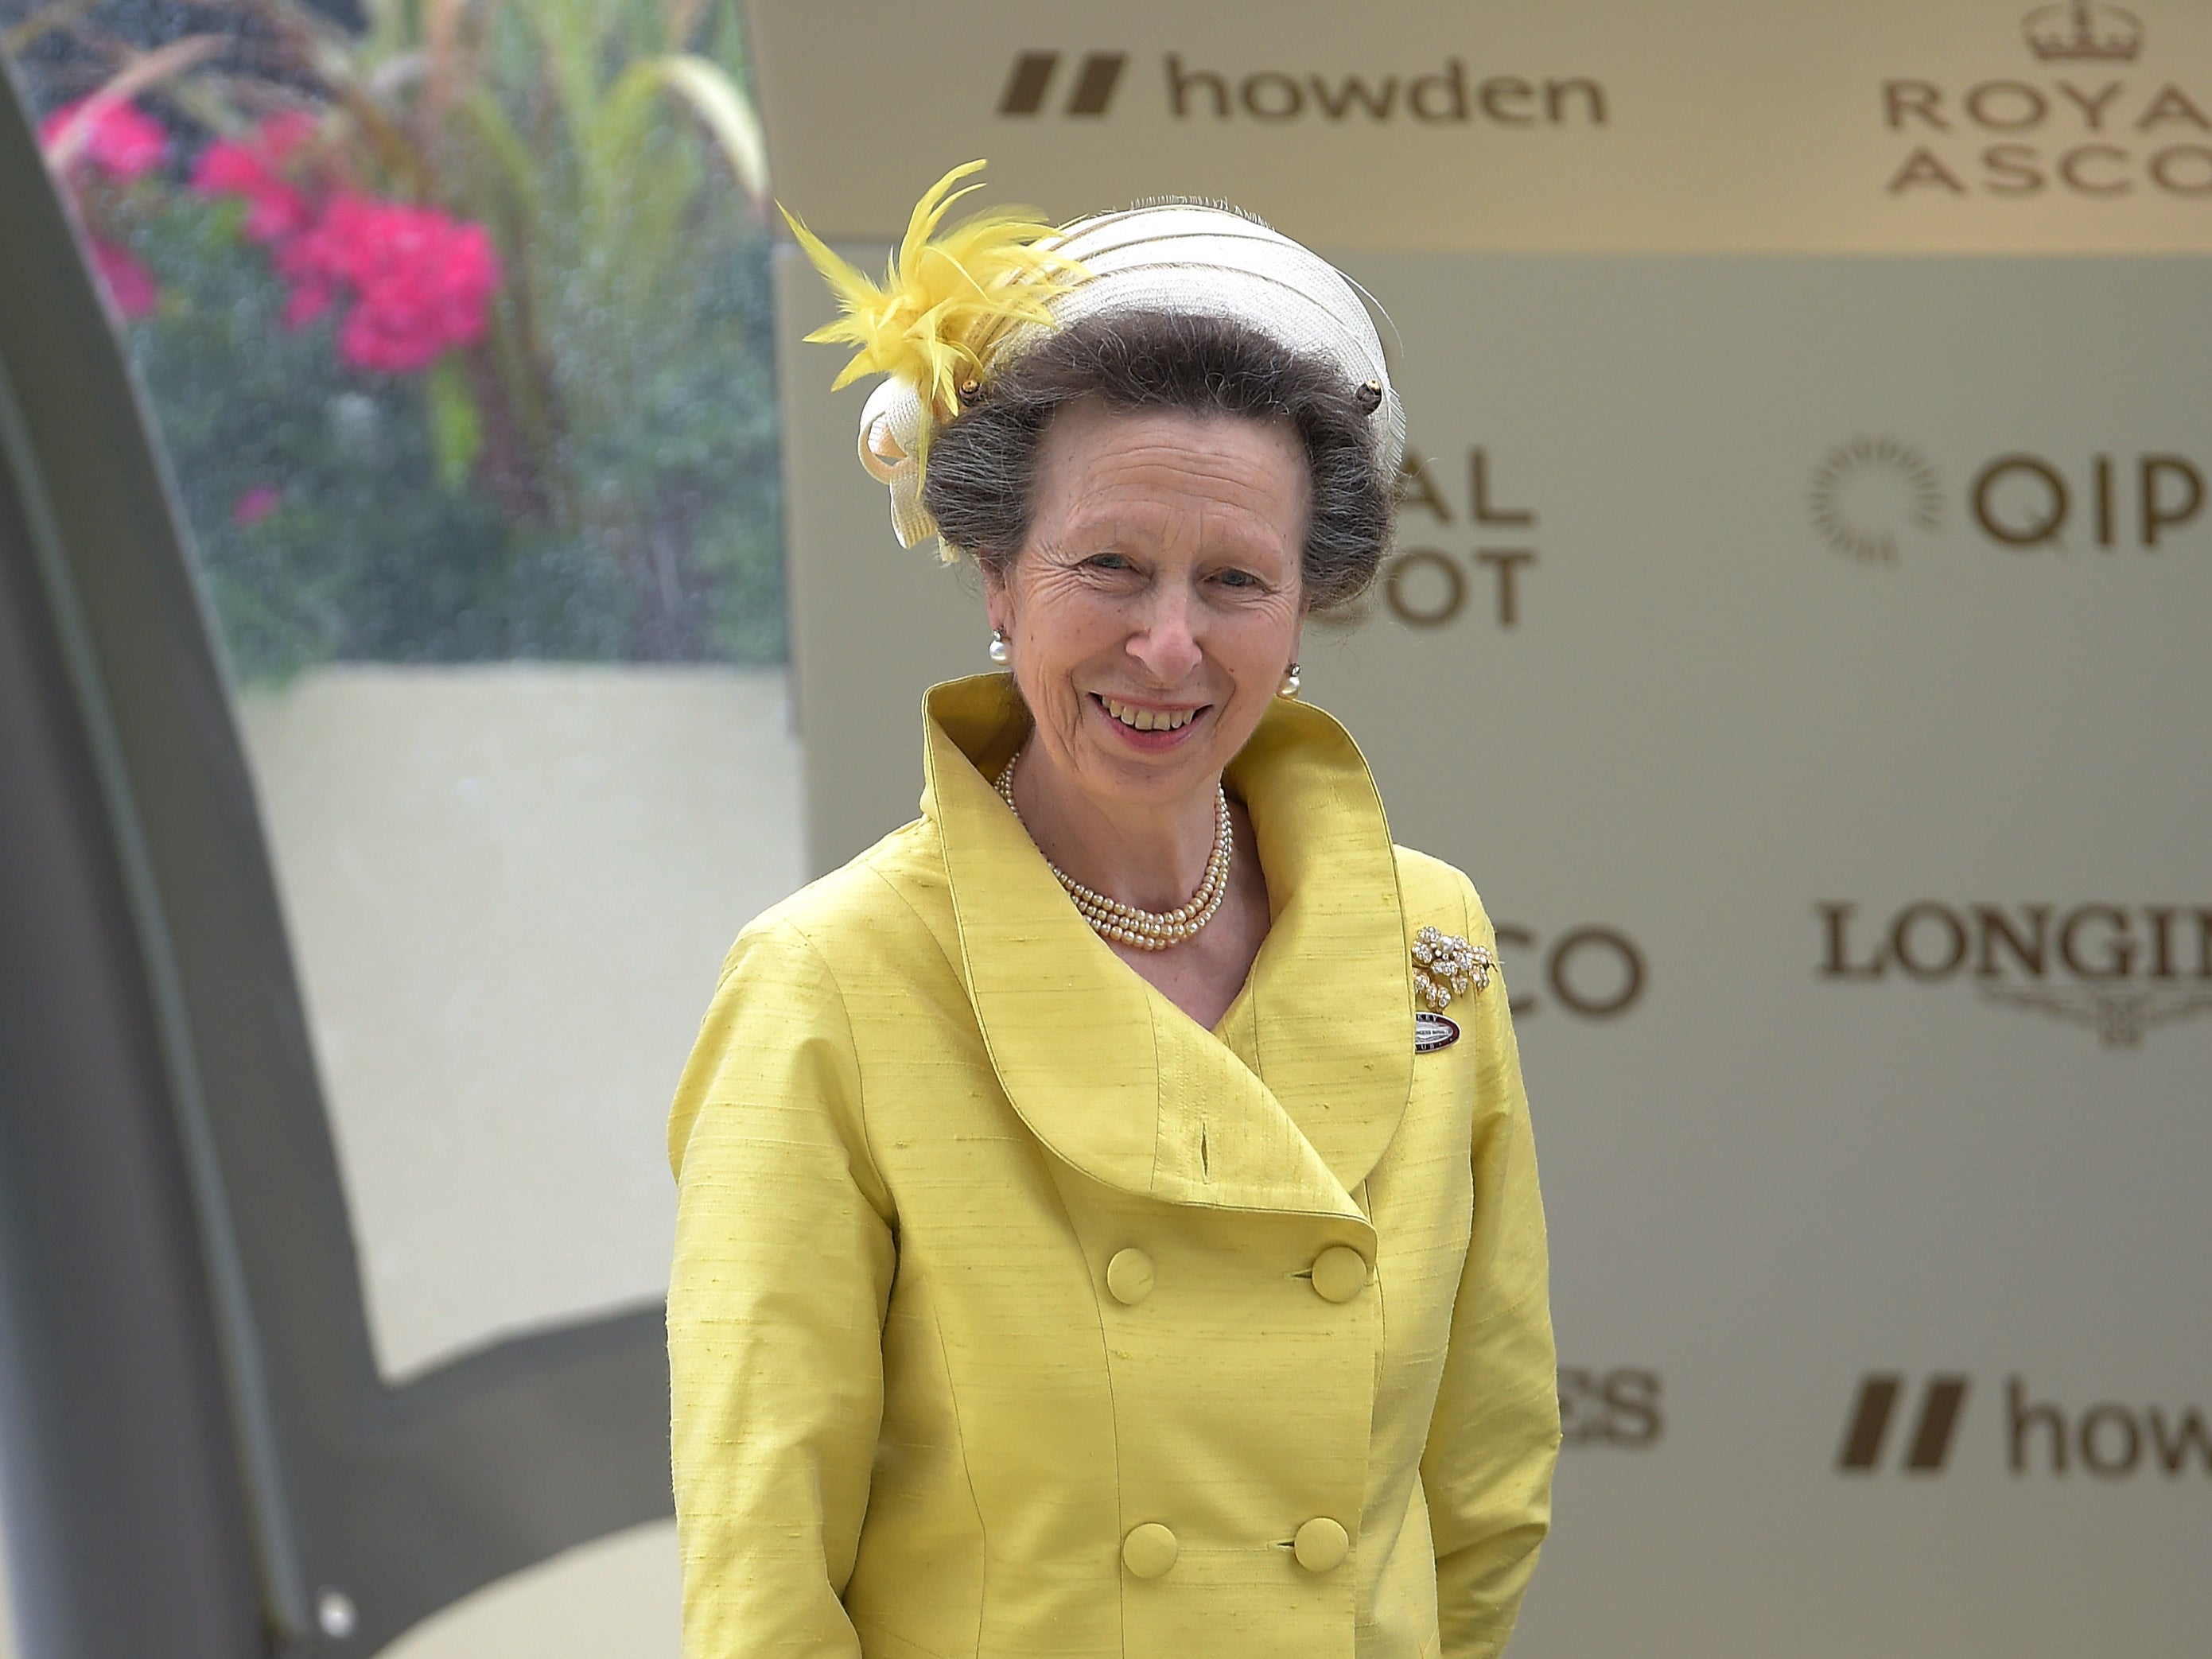 Princess Anne was the first royal to compete in the Olympic Games